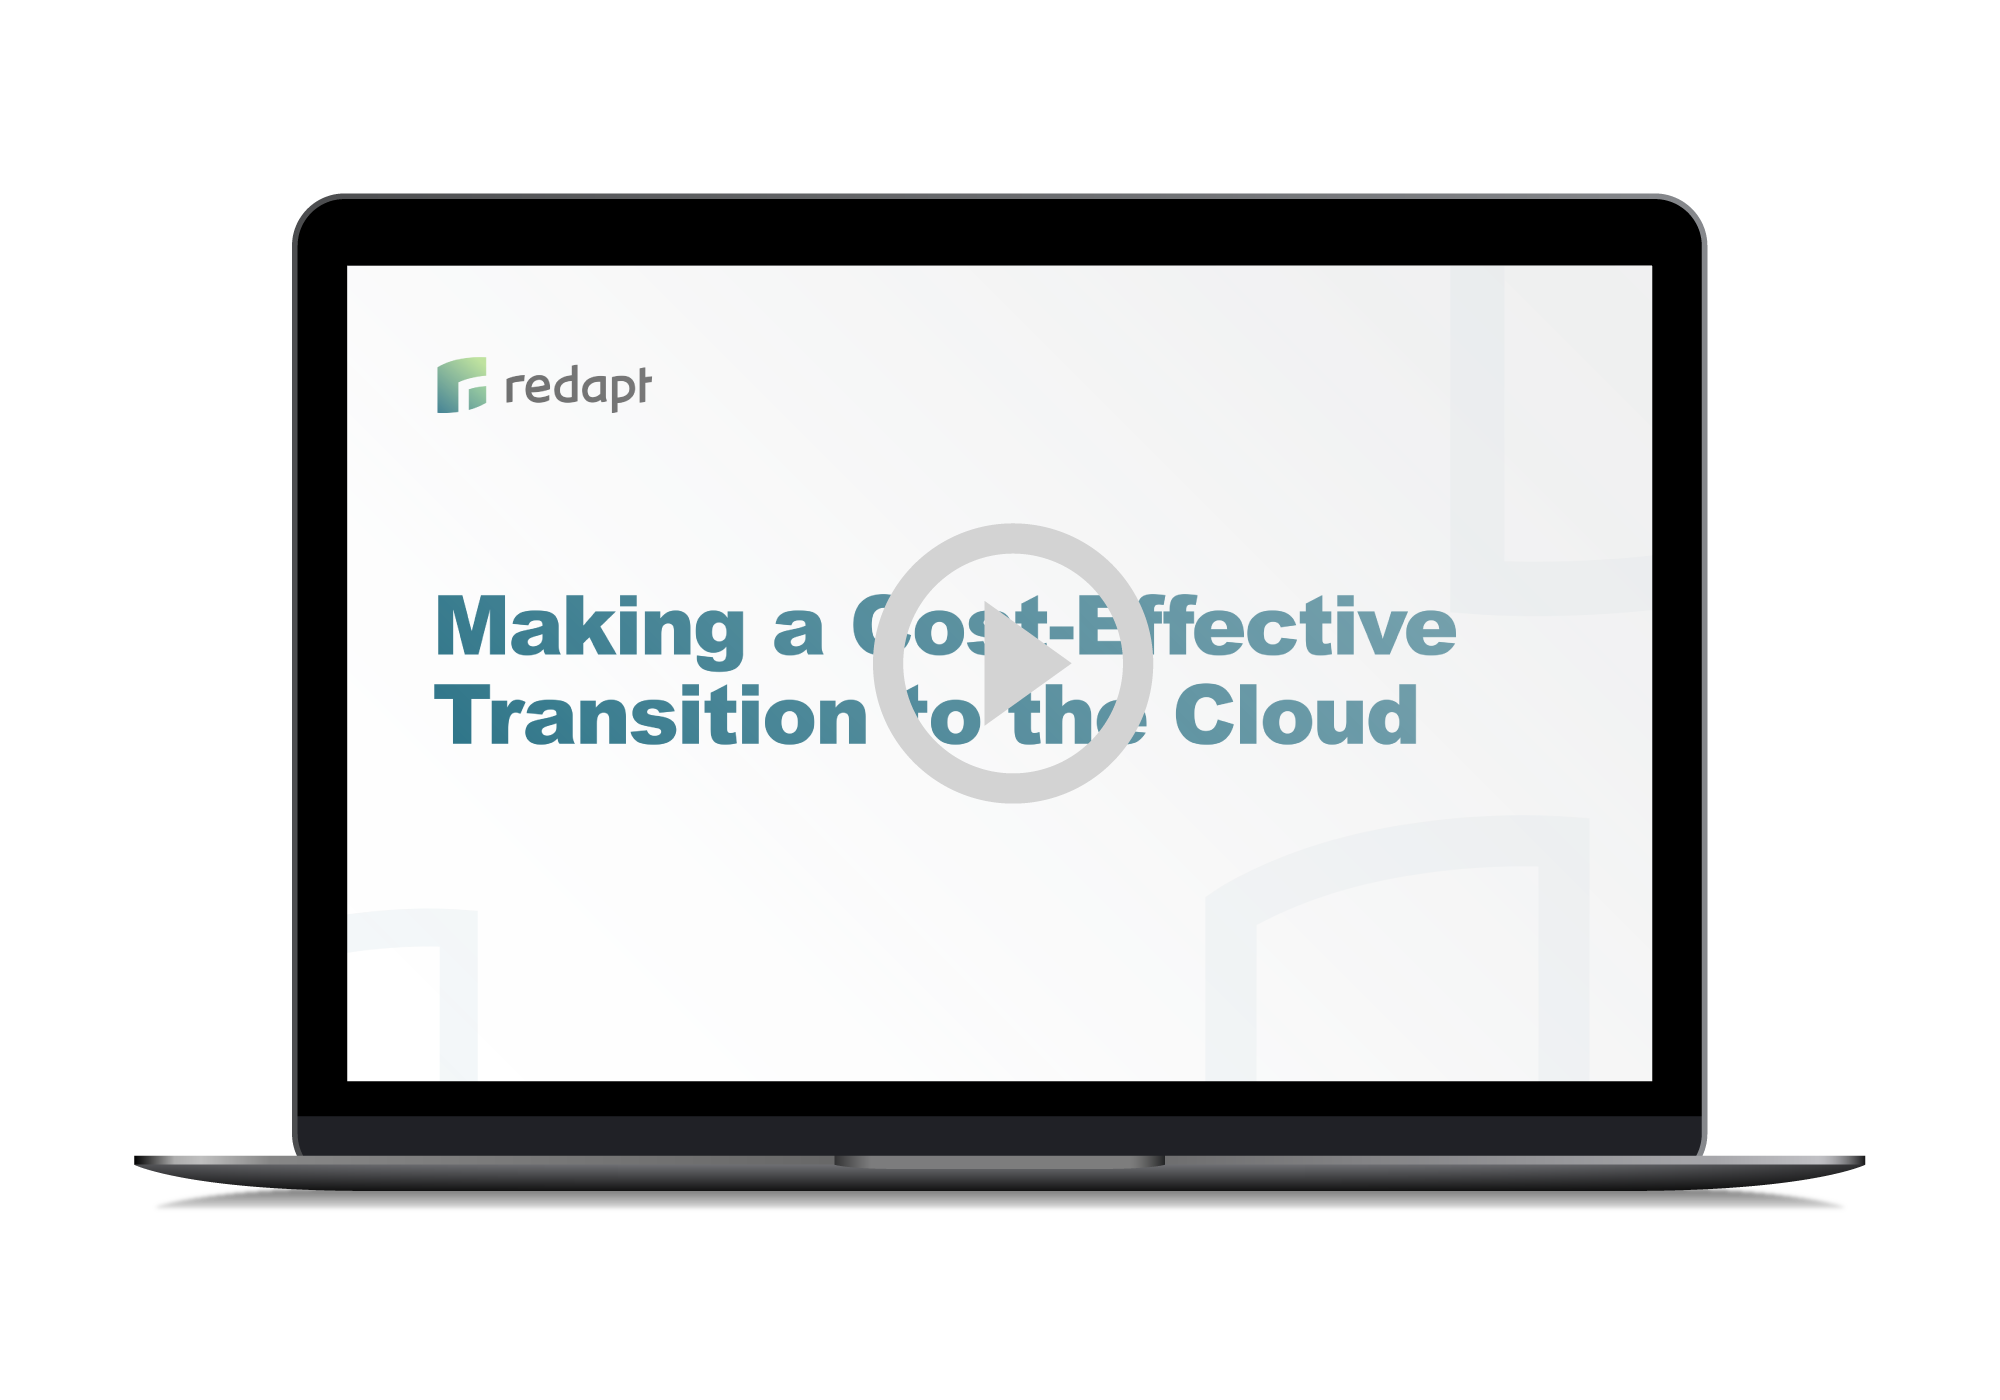 Webinar Video: Making a Cost-Effective Transition to the Cloud